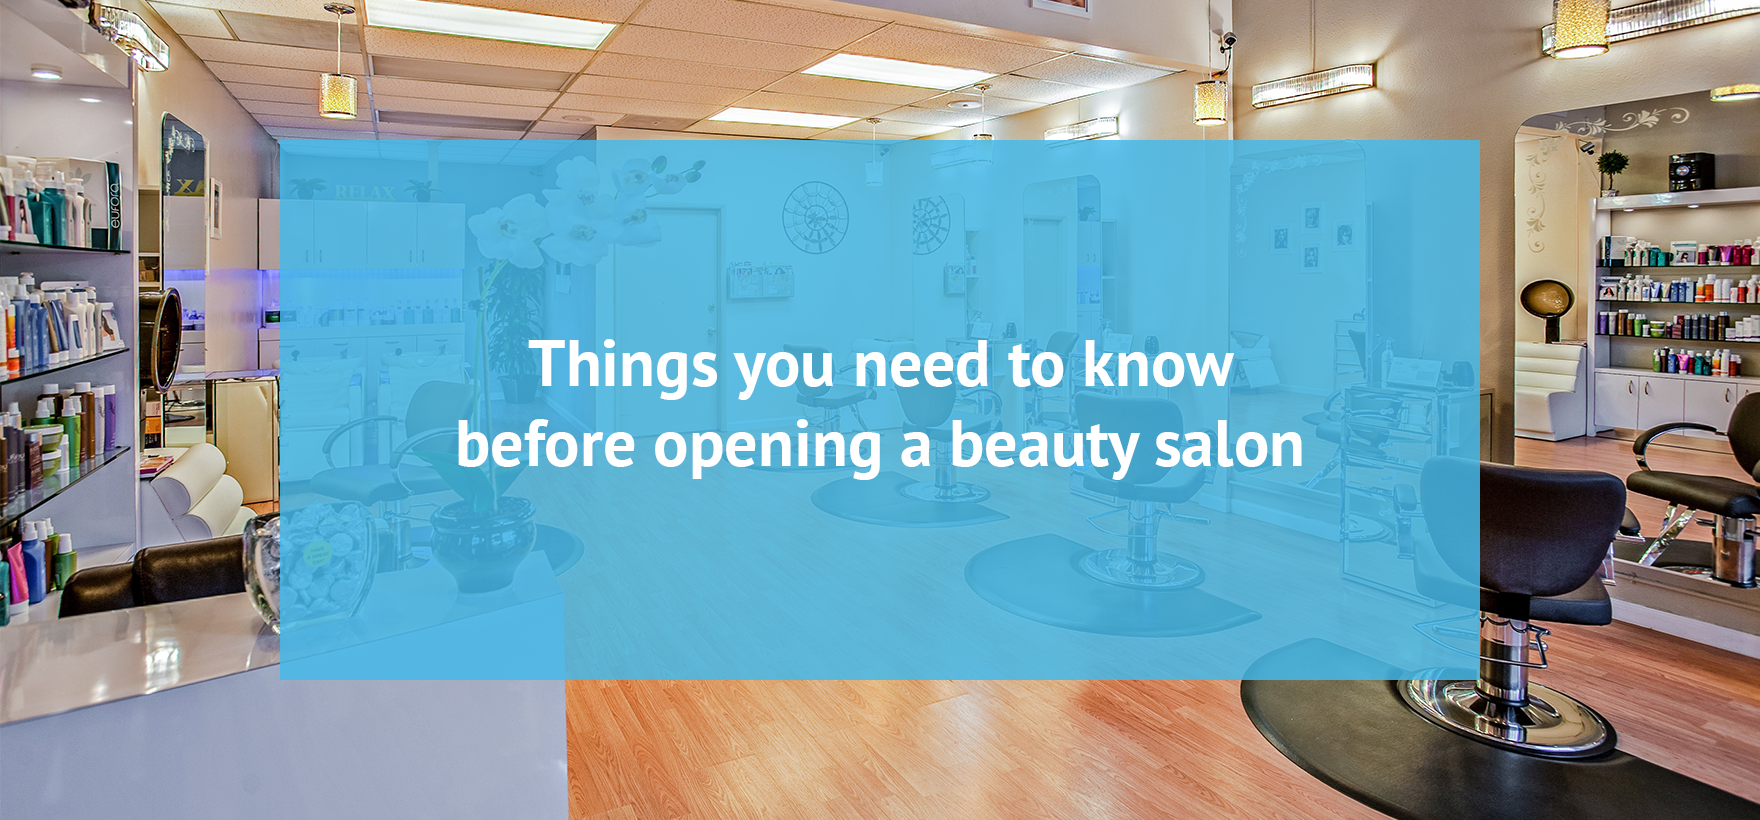 Things You Need to Know Before Opening a Beauty Salon